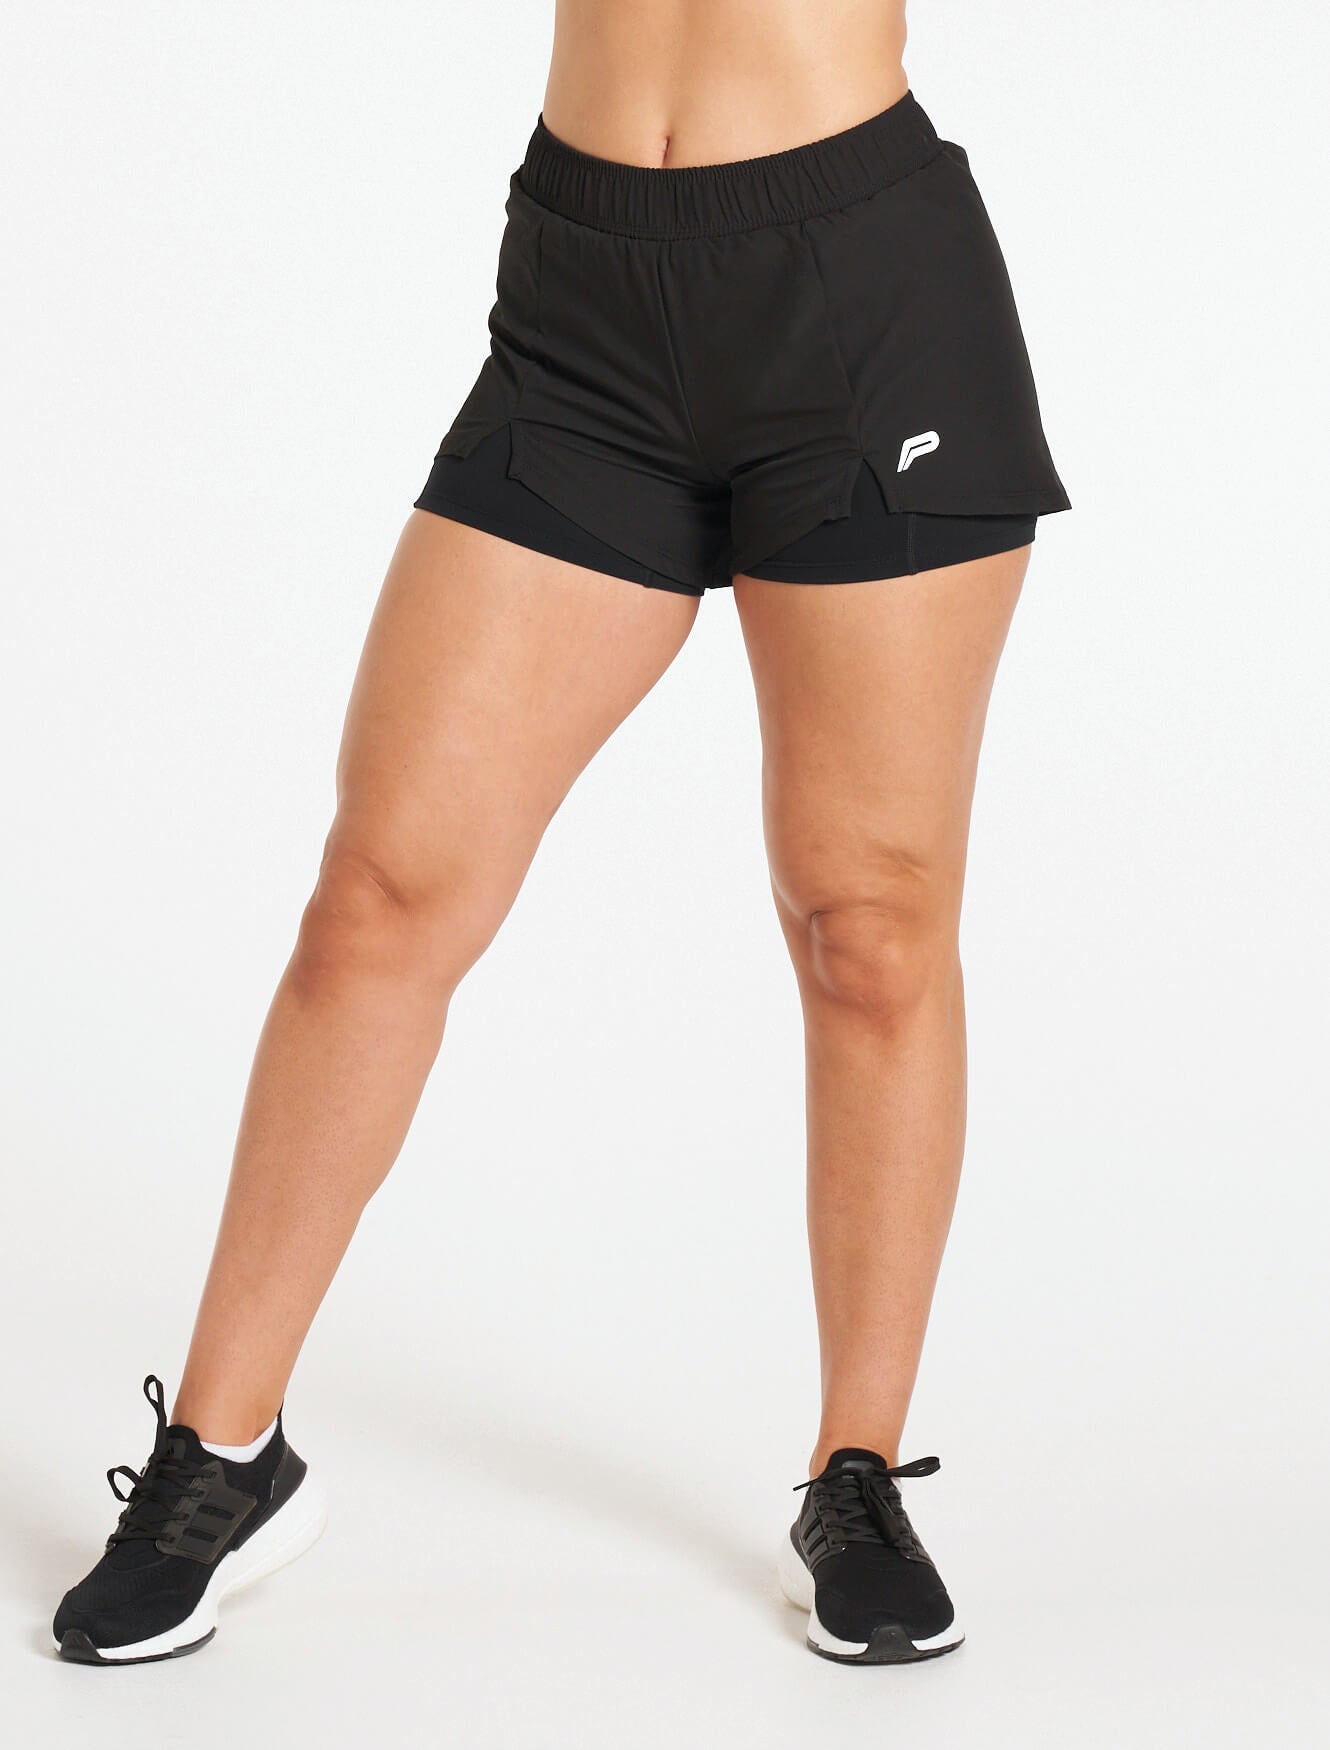 Pace Running Shorts / Blackout Pursue Fitness 4